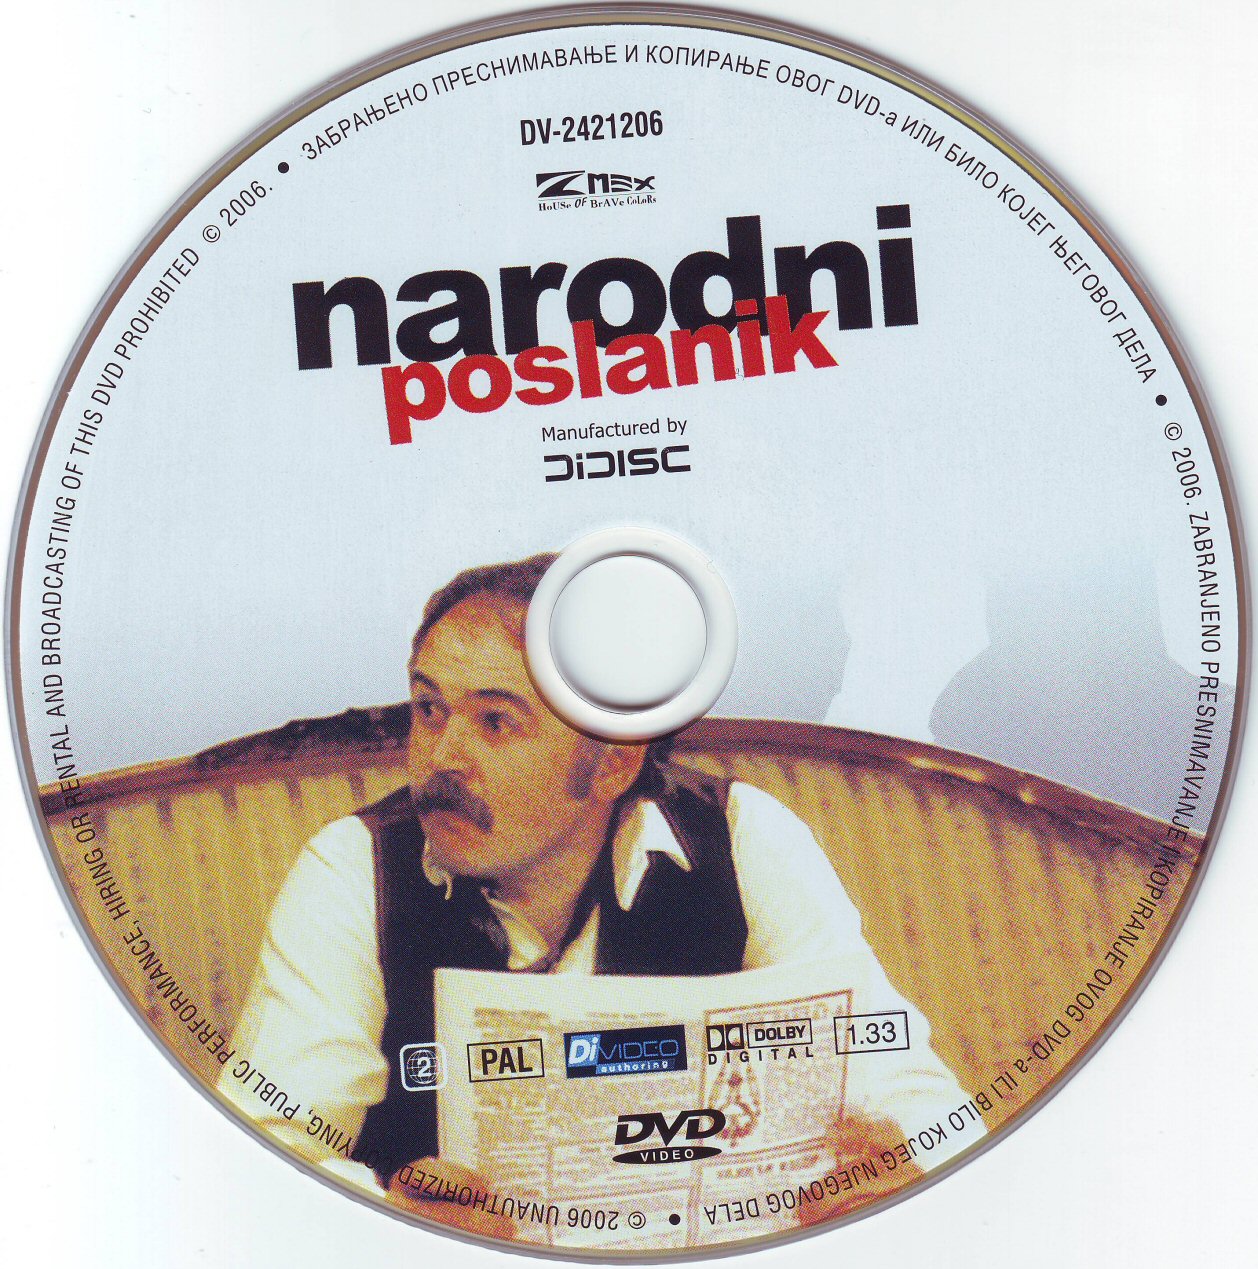 Click to view full size image -  DVD Cover - N - DVD - NARODNI POSLANIK - CD - DVD - NARODNI POSLANIK - CD.jpg